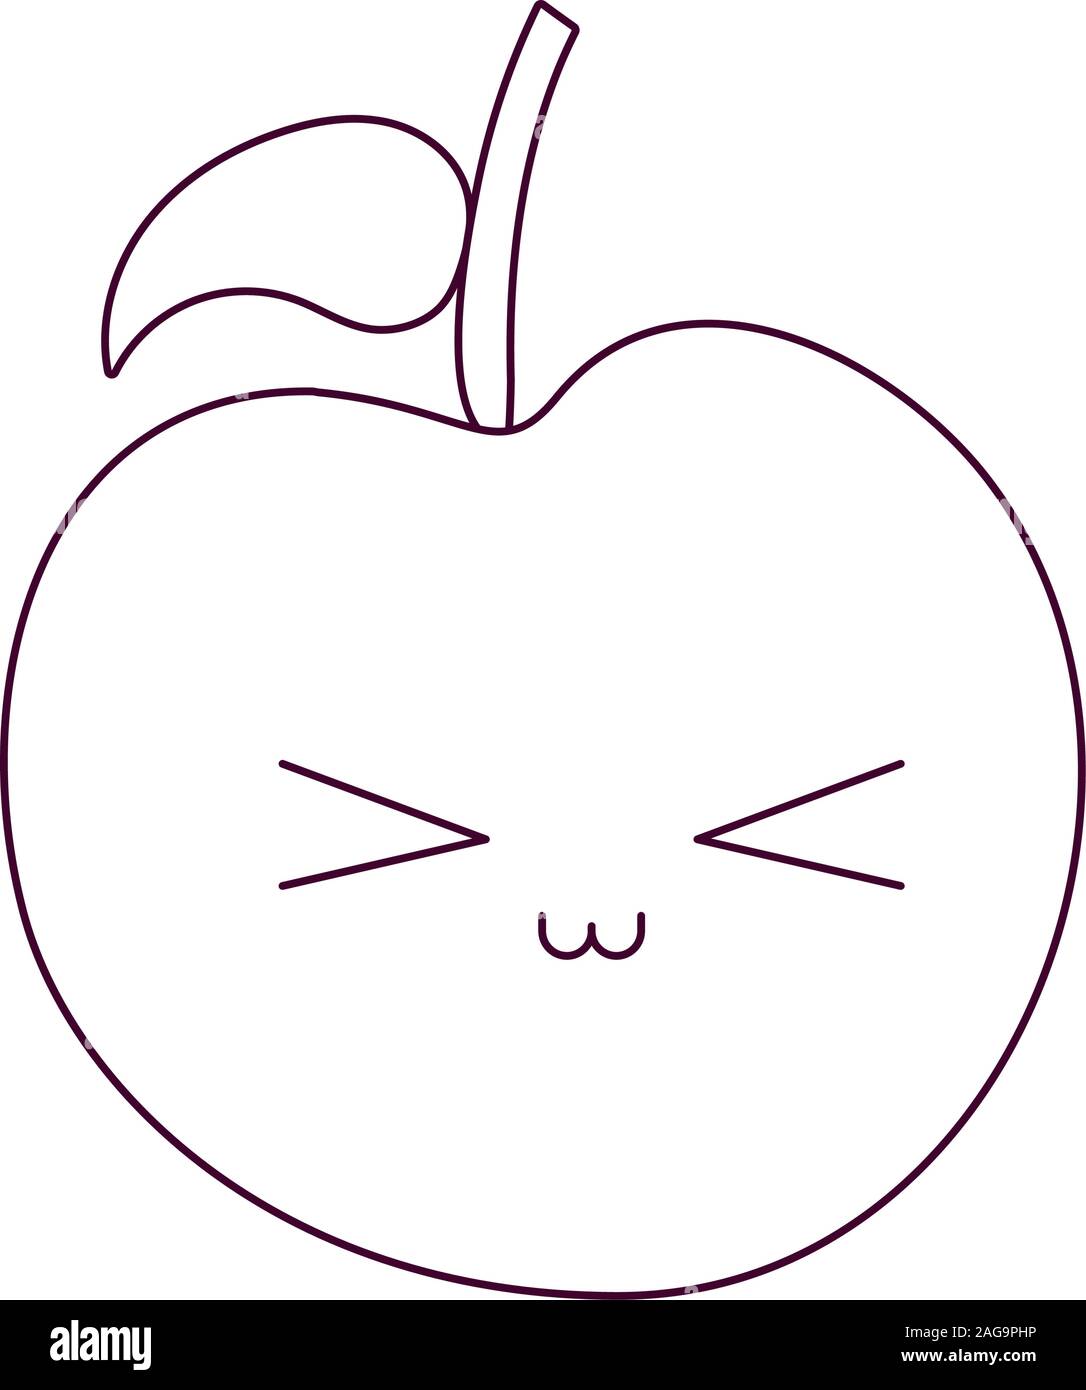 apple cartoon design, Kawaii expression cute character funny and ...